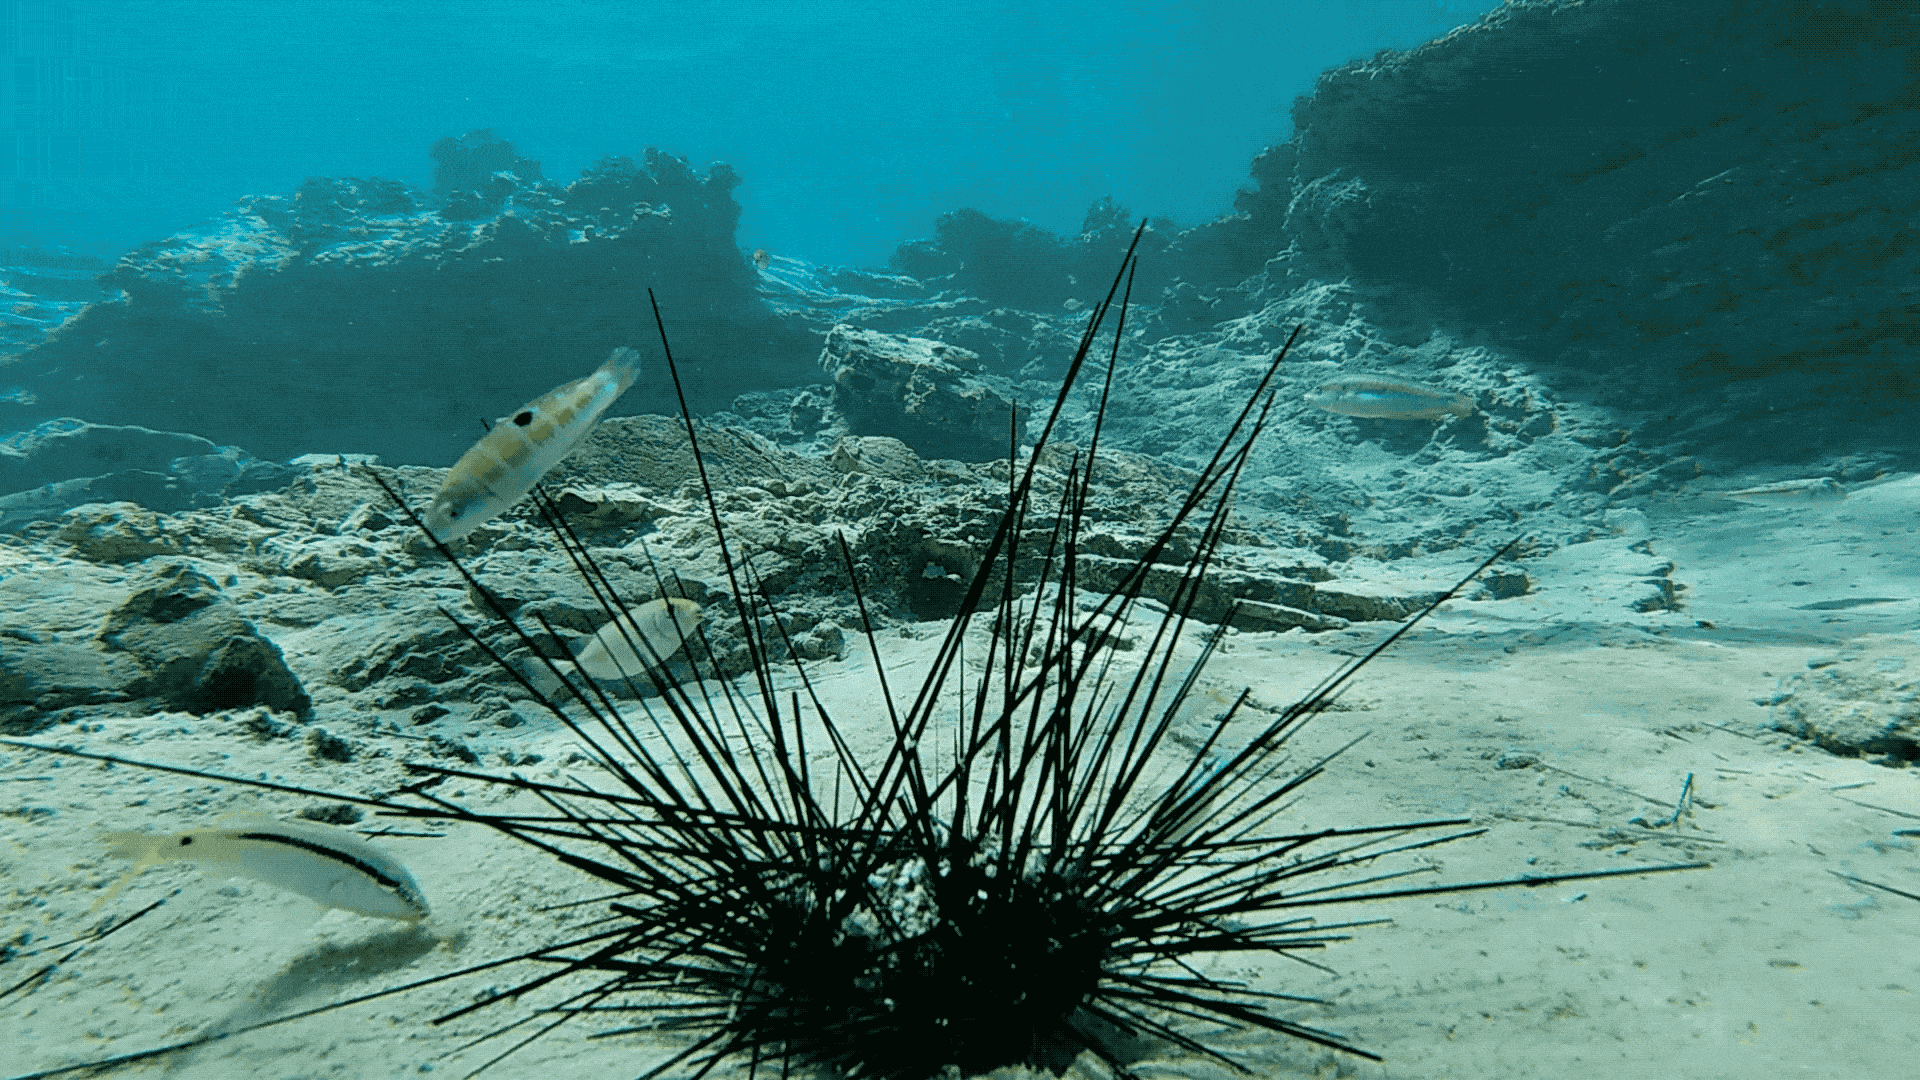 Fish pecking at a dead sea urchin in the Gulf of Aqaba.